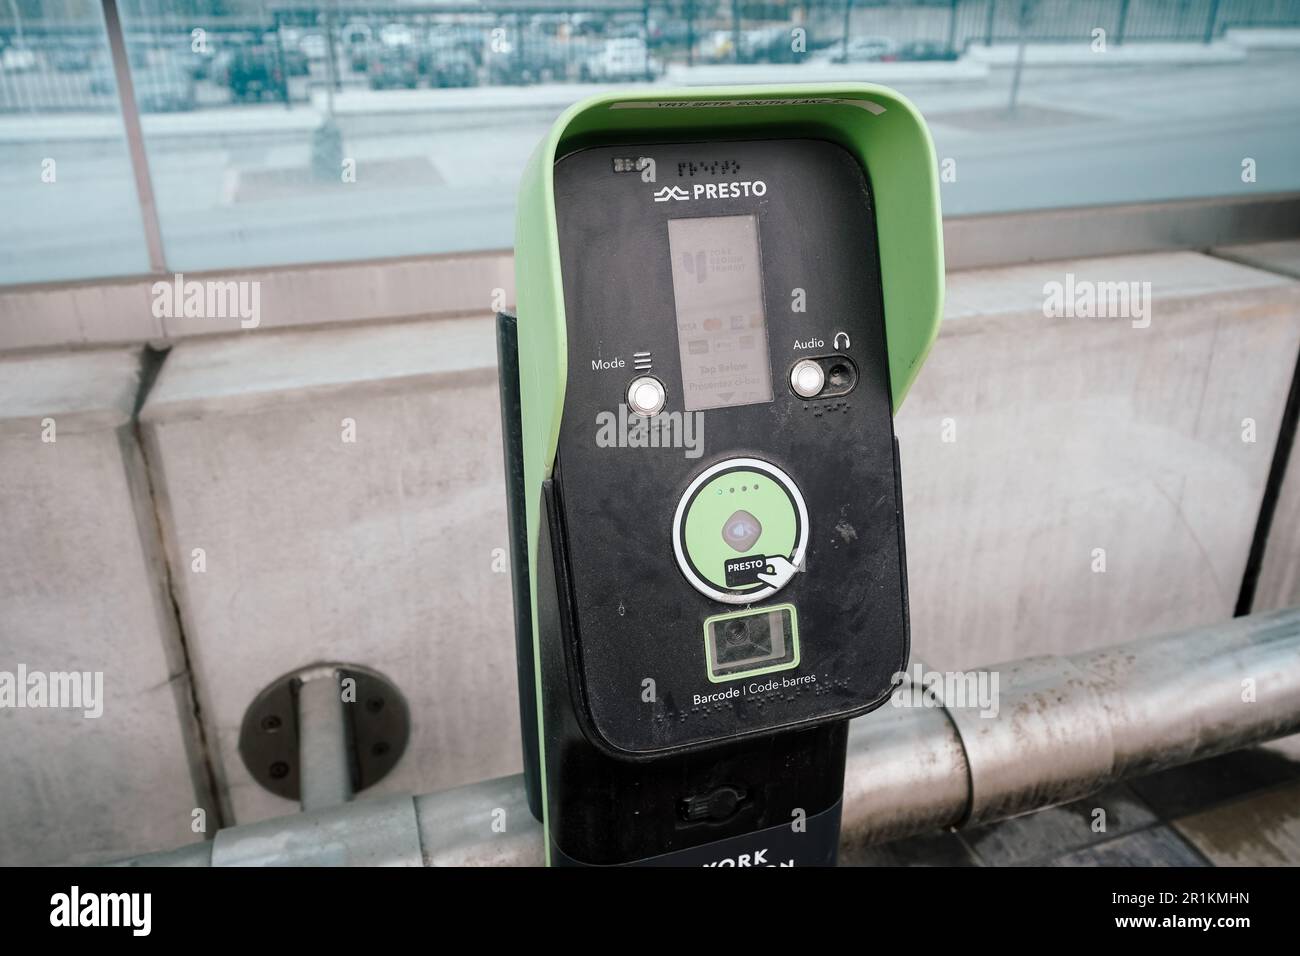 presto card reader, a contactless automated public transit fare collection system used in Ontario, Canada Stock Photo